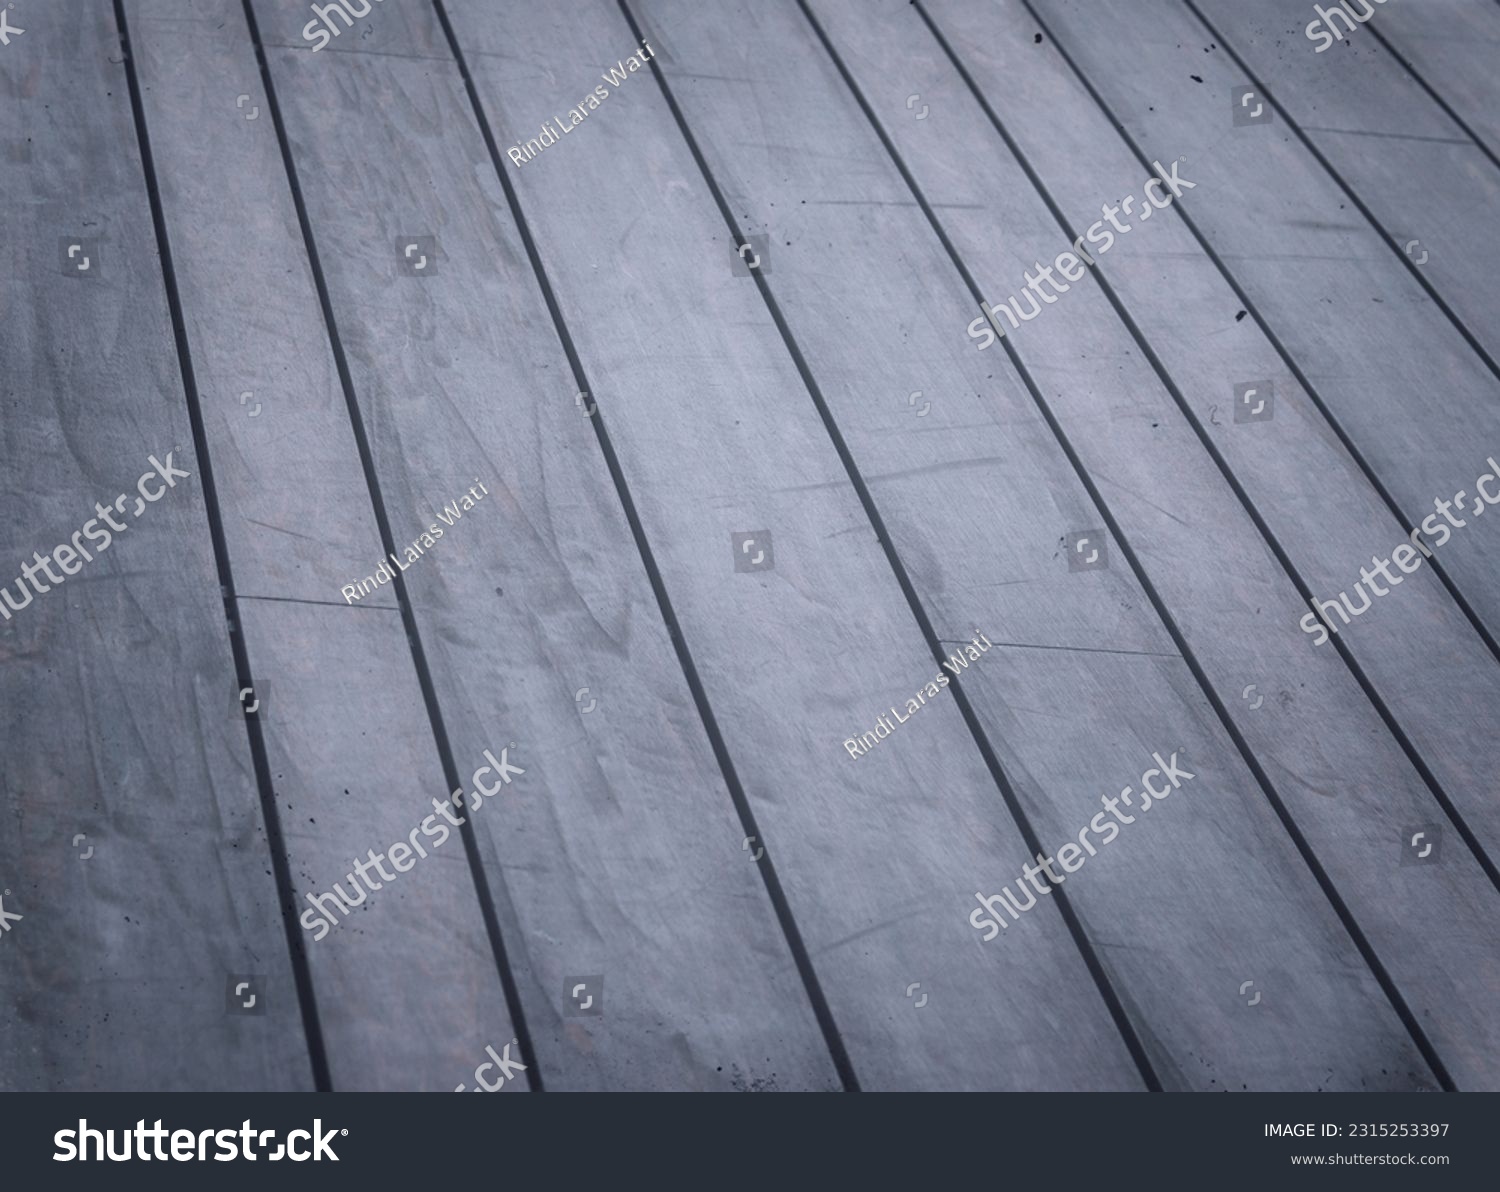 The wooden background from the floor is arranged tightly, and looks classic #2315253397